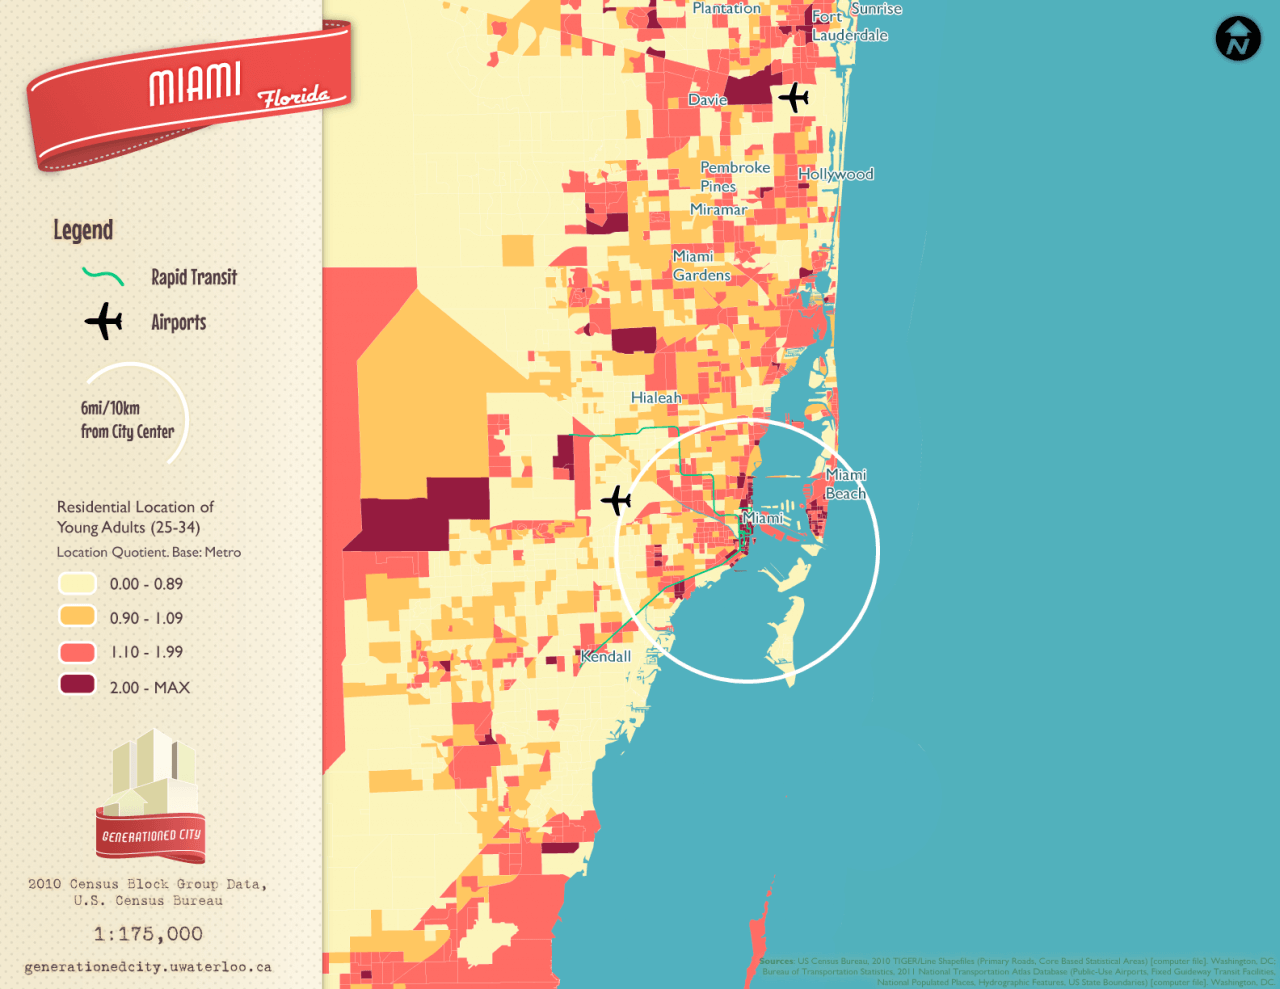 Residential location of young adults in Miami.